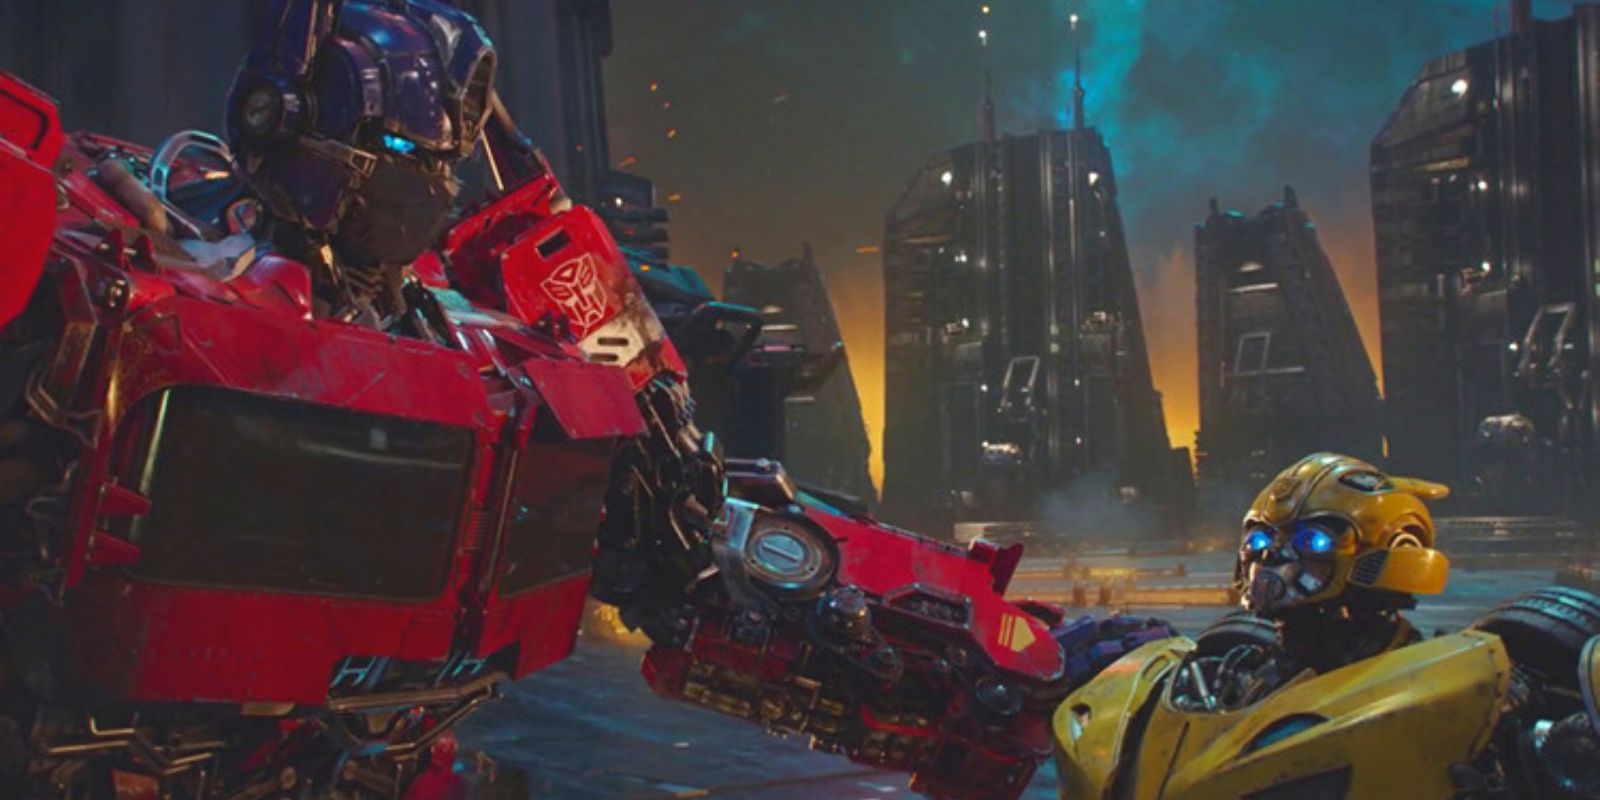 Optimus Prime with his and on Bumblebee's shoulder, Cybertron in the background